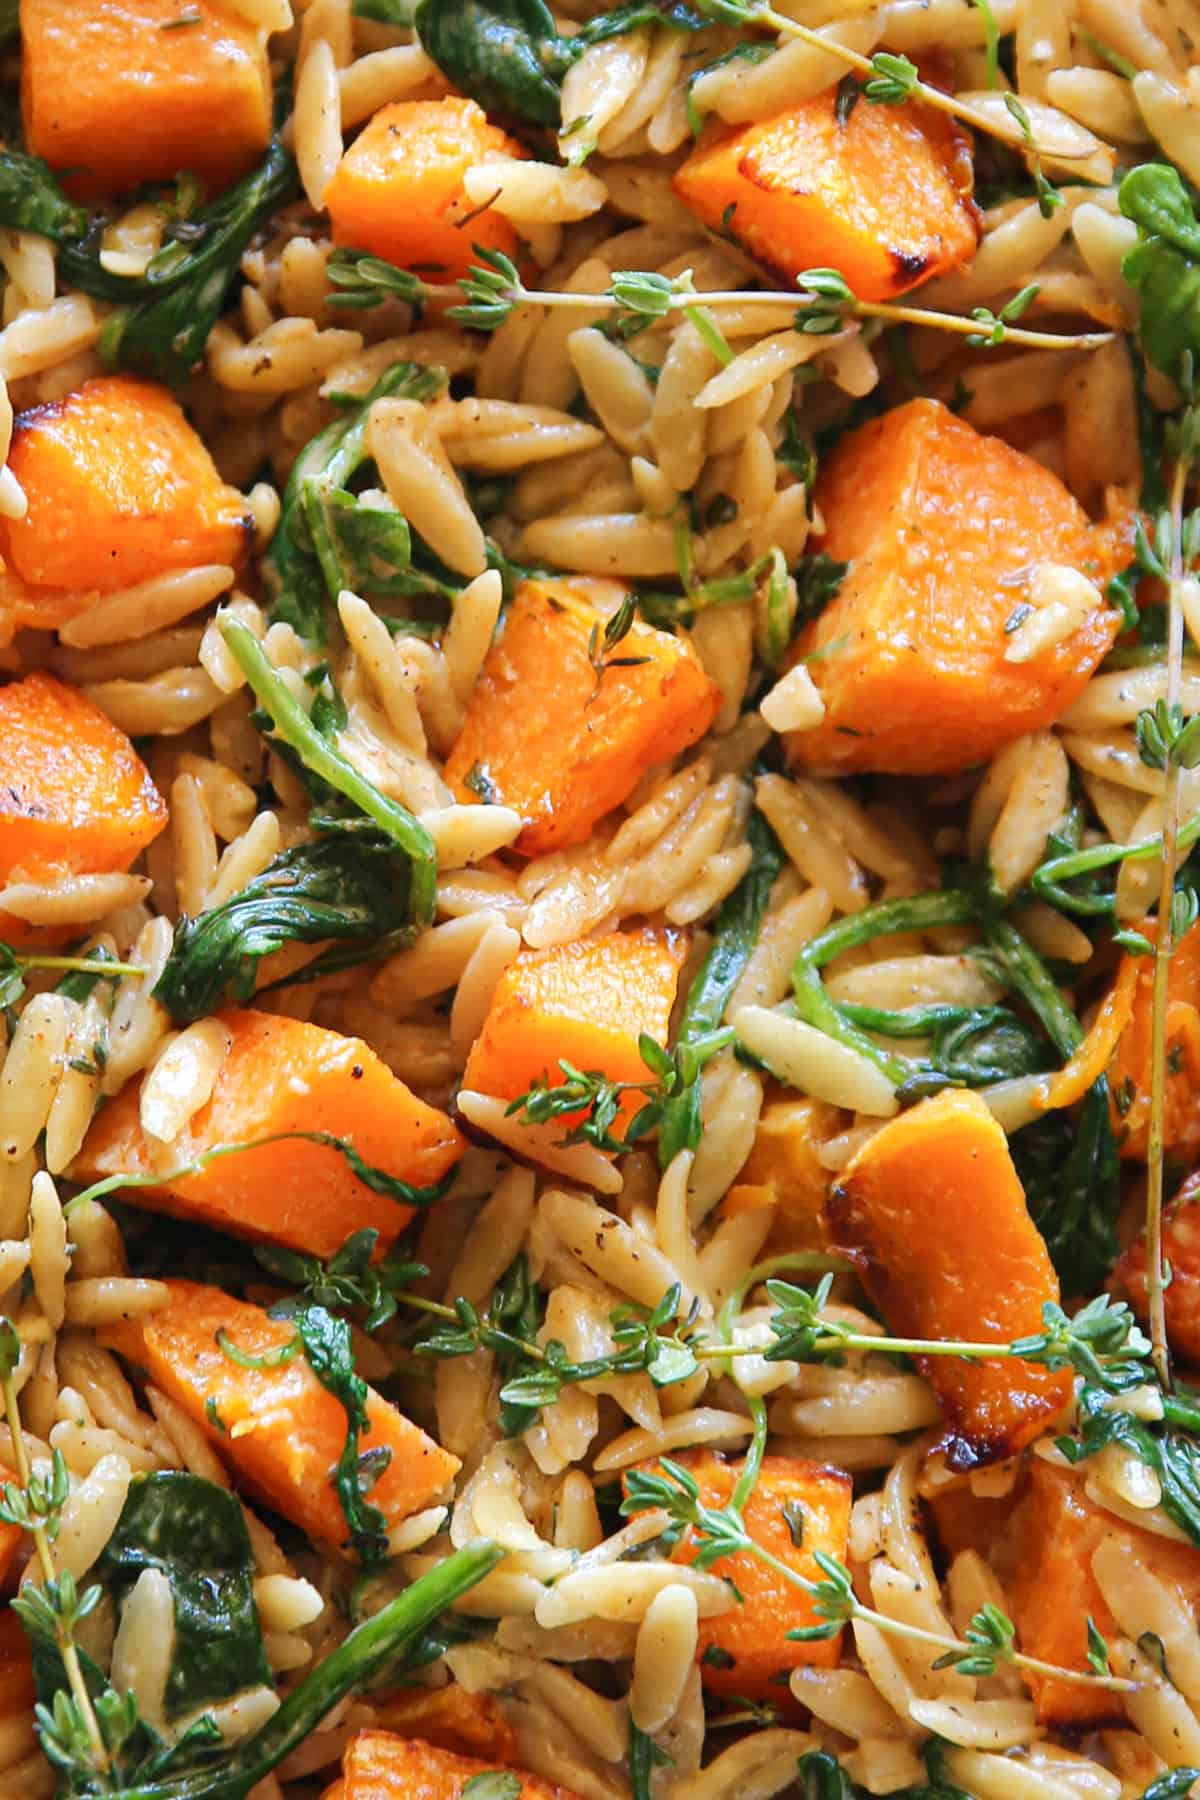 creamy orzo pasta with butternut squash and spinach - close-up photo.